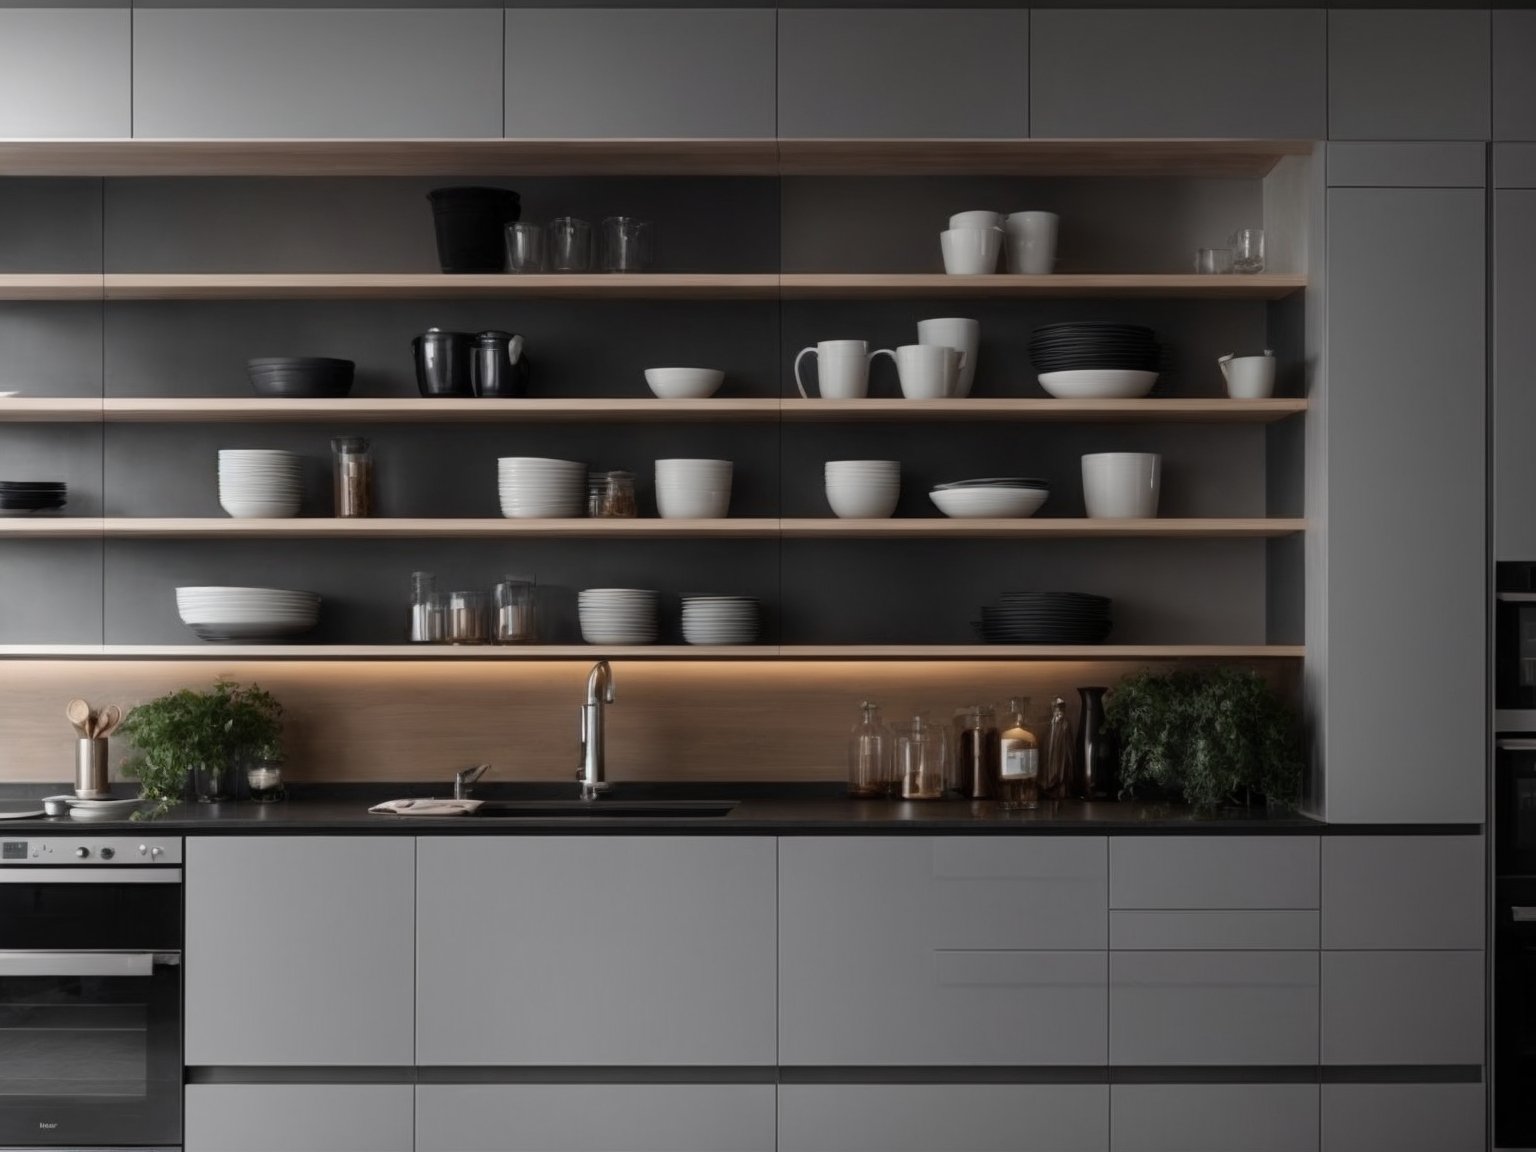 A sleek and modern grey kitchen cabinet with stainless steel handles